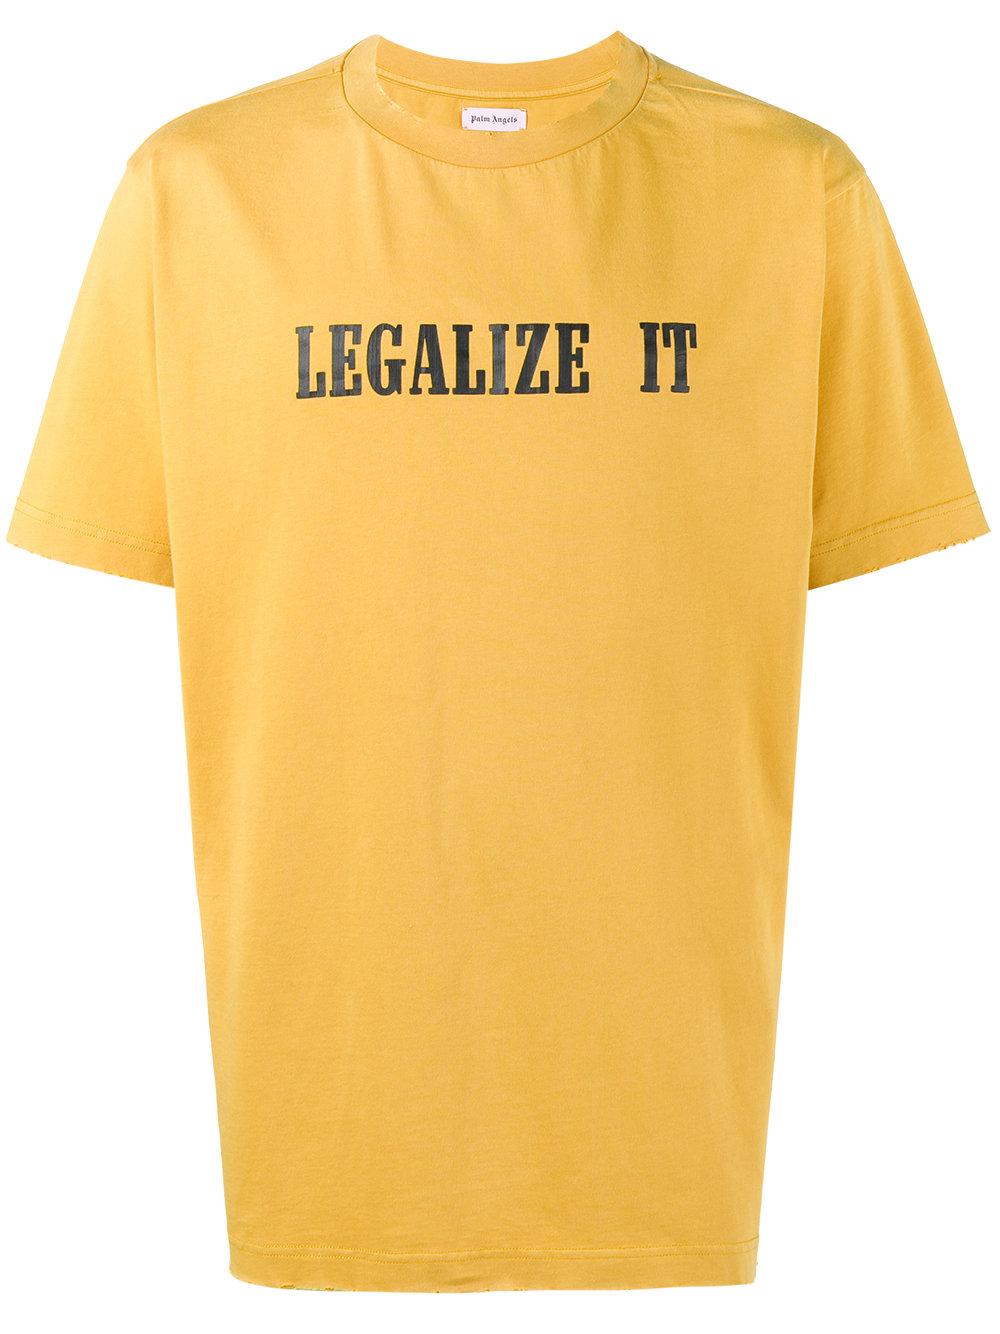 Lyst - Palm Angels Legalize It T-shirt in Yellow for Men - Save 8%